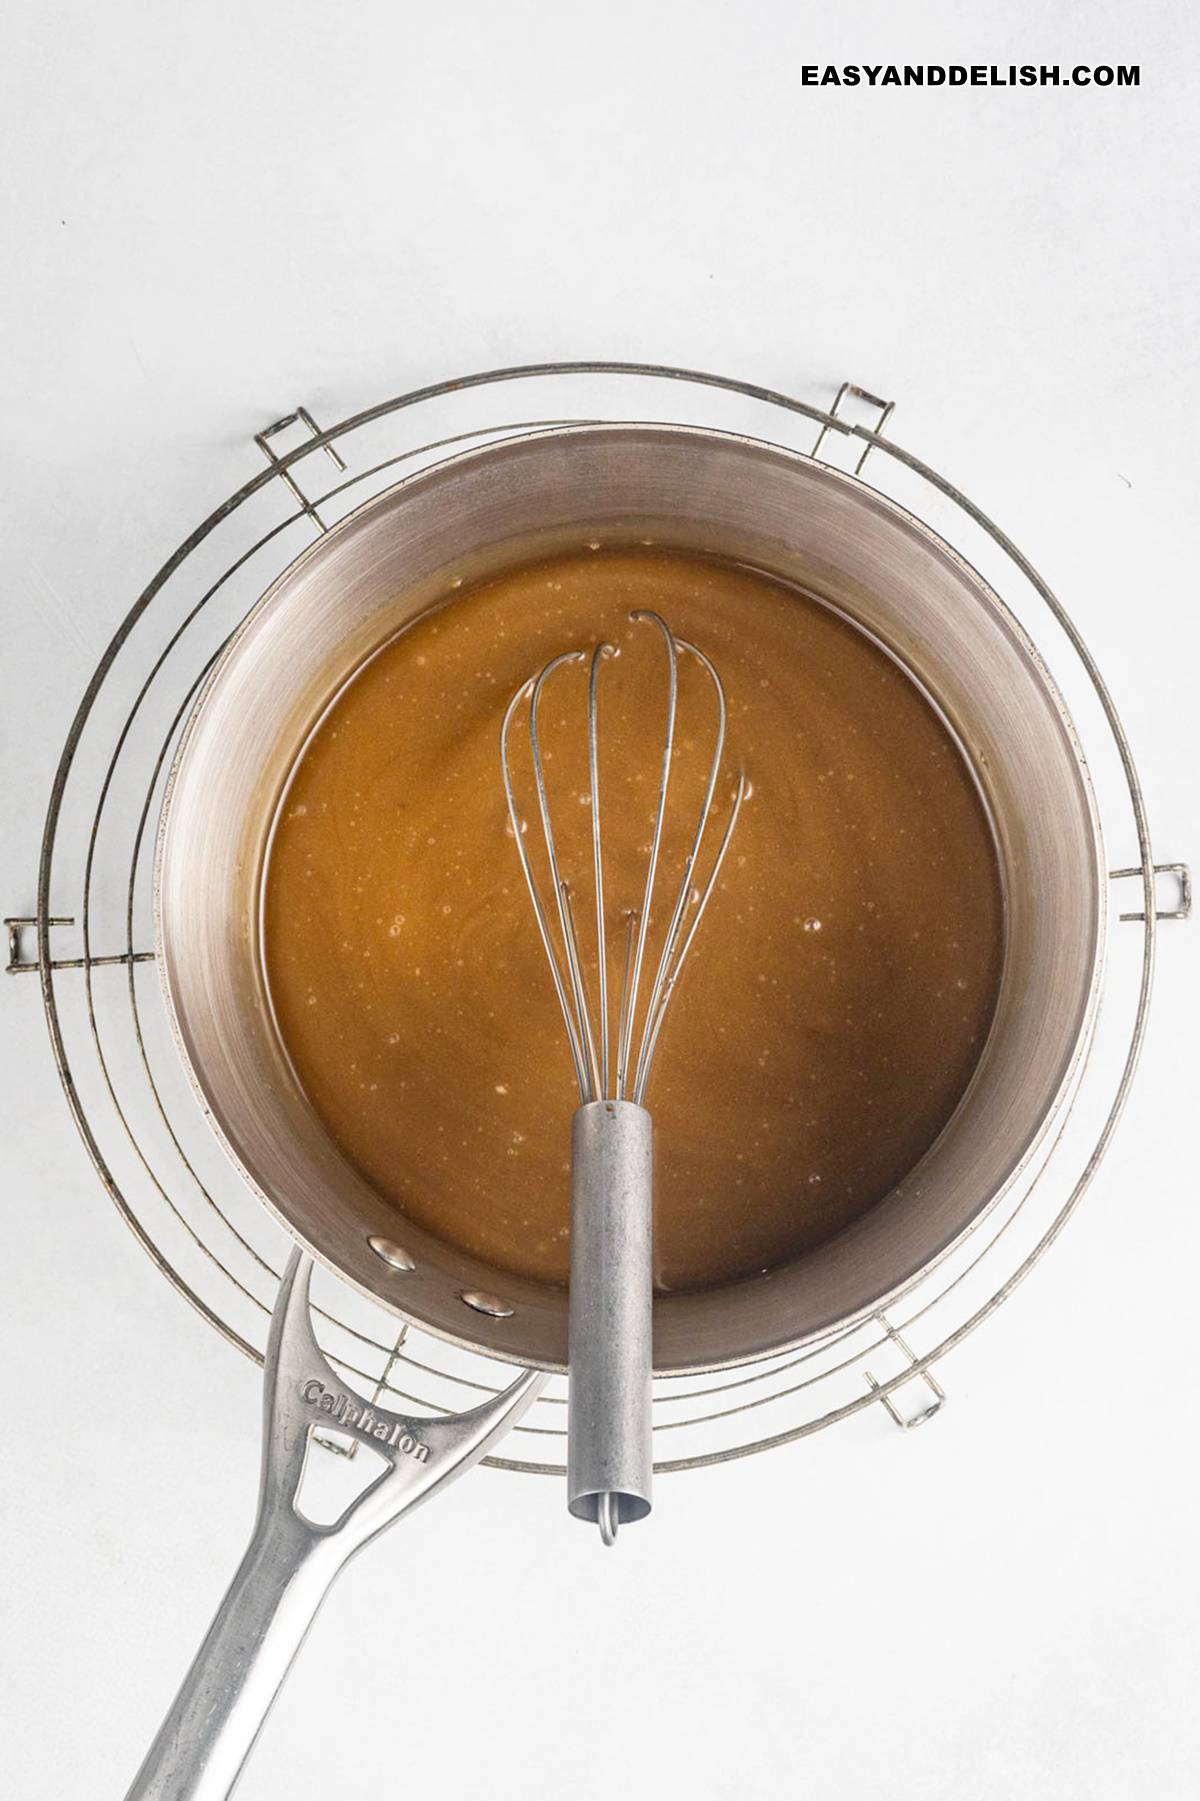 Making caramel frosting or glaze in a pan.